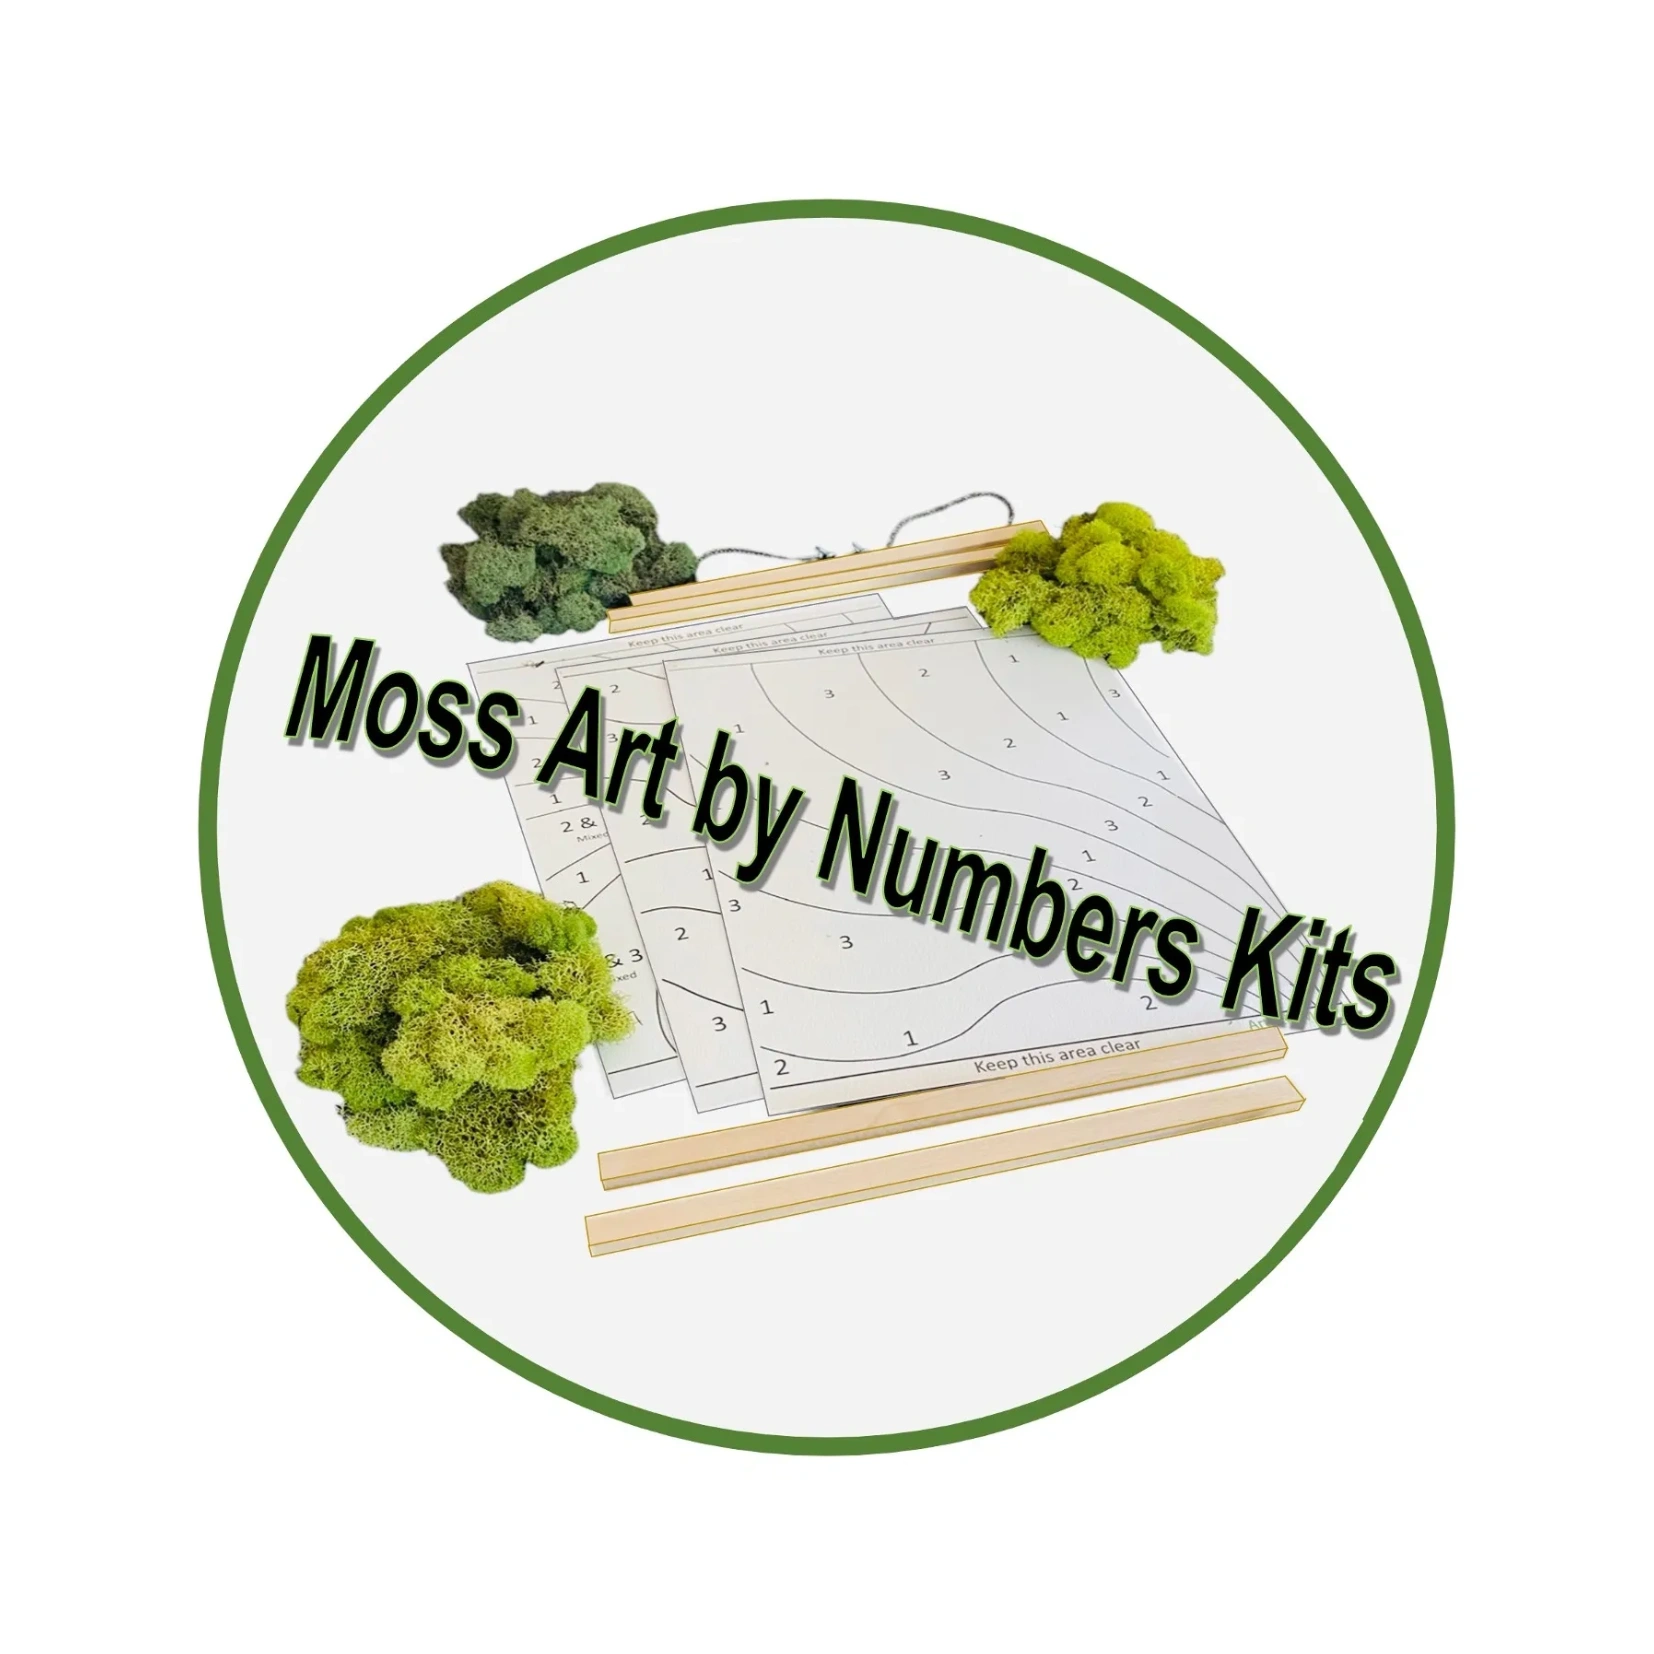 Moss Art by Numbers The Original Kit. Based on The. Paint by Numbers. Method of Instruction But Using. Natural Preserved Moss. Instead of Paint.